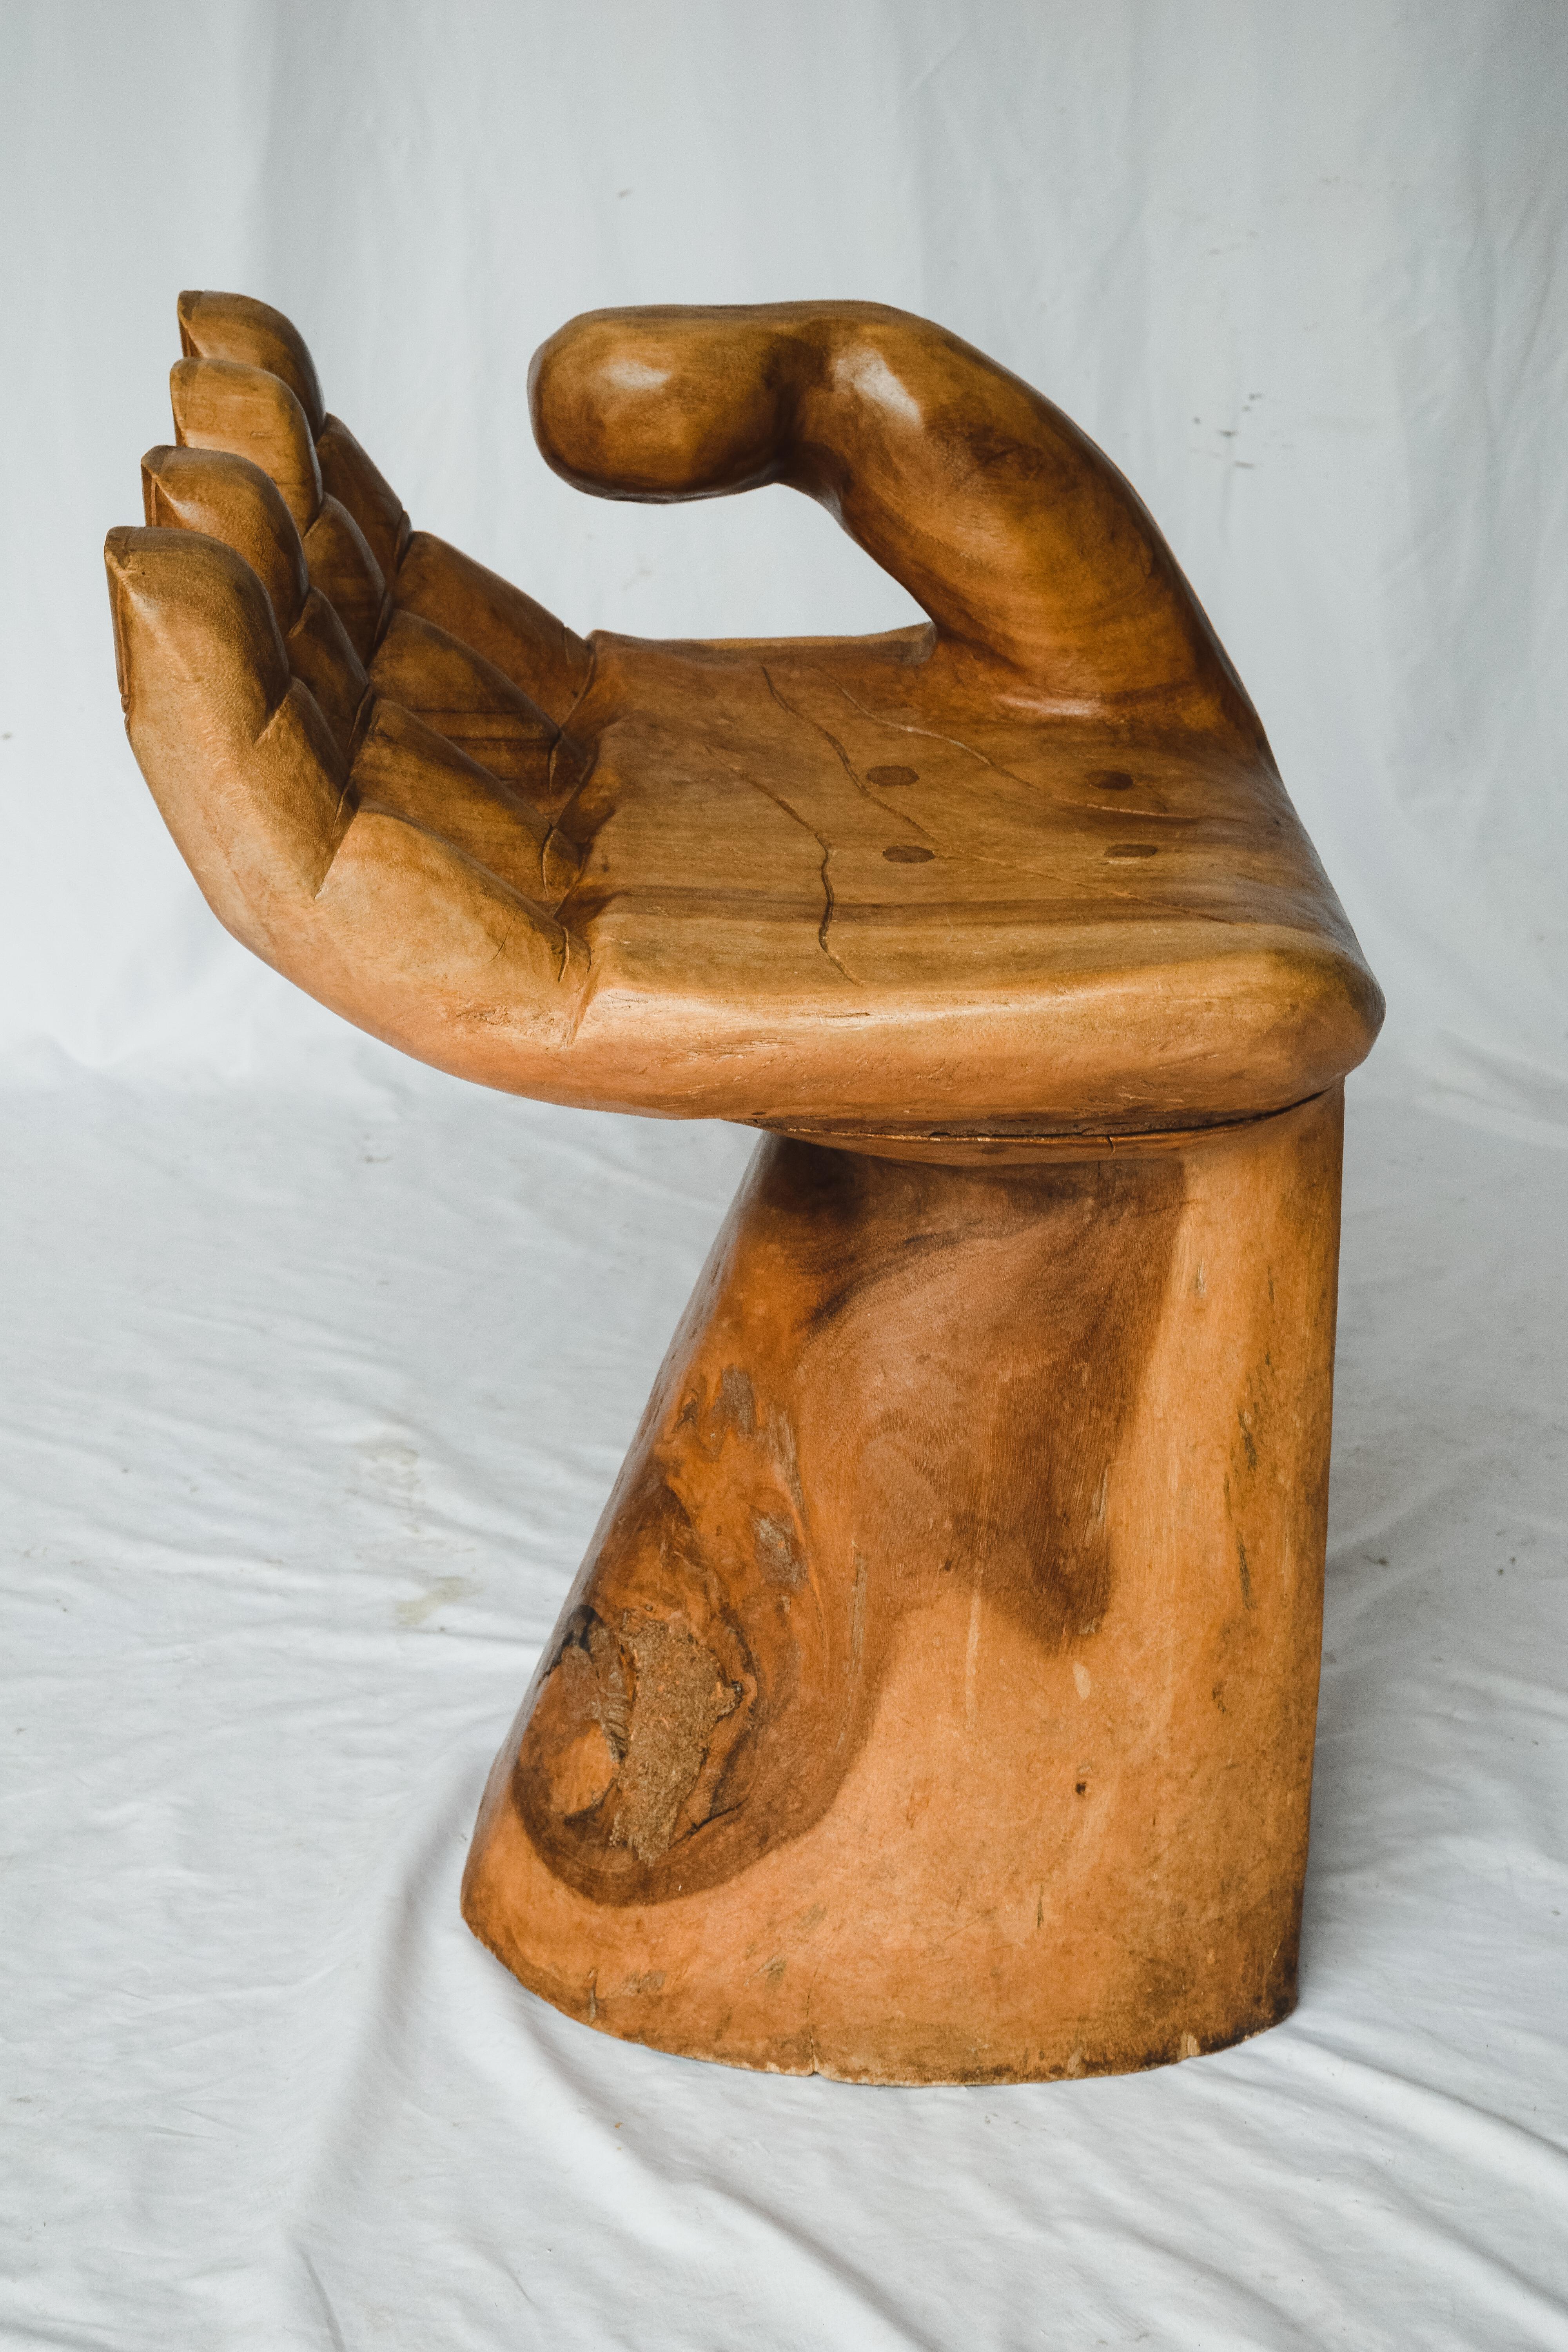 1960's wooden carved hand chair, or objet d'art after the iconic Pedro Friedeberg hand chair. This interesting piece would make a wonderful sculptural decoration, and/or conversation piece. Vintage 1960/ 1970's unsigned. This arm chair is solid and